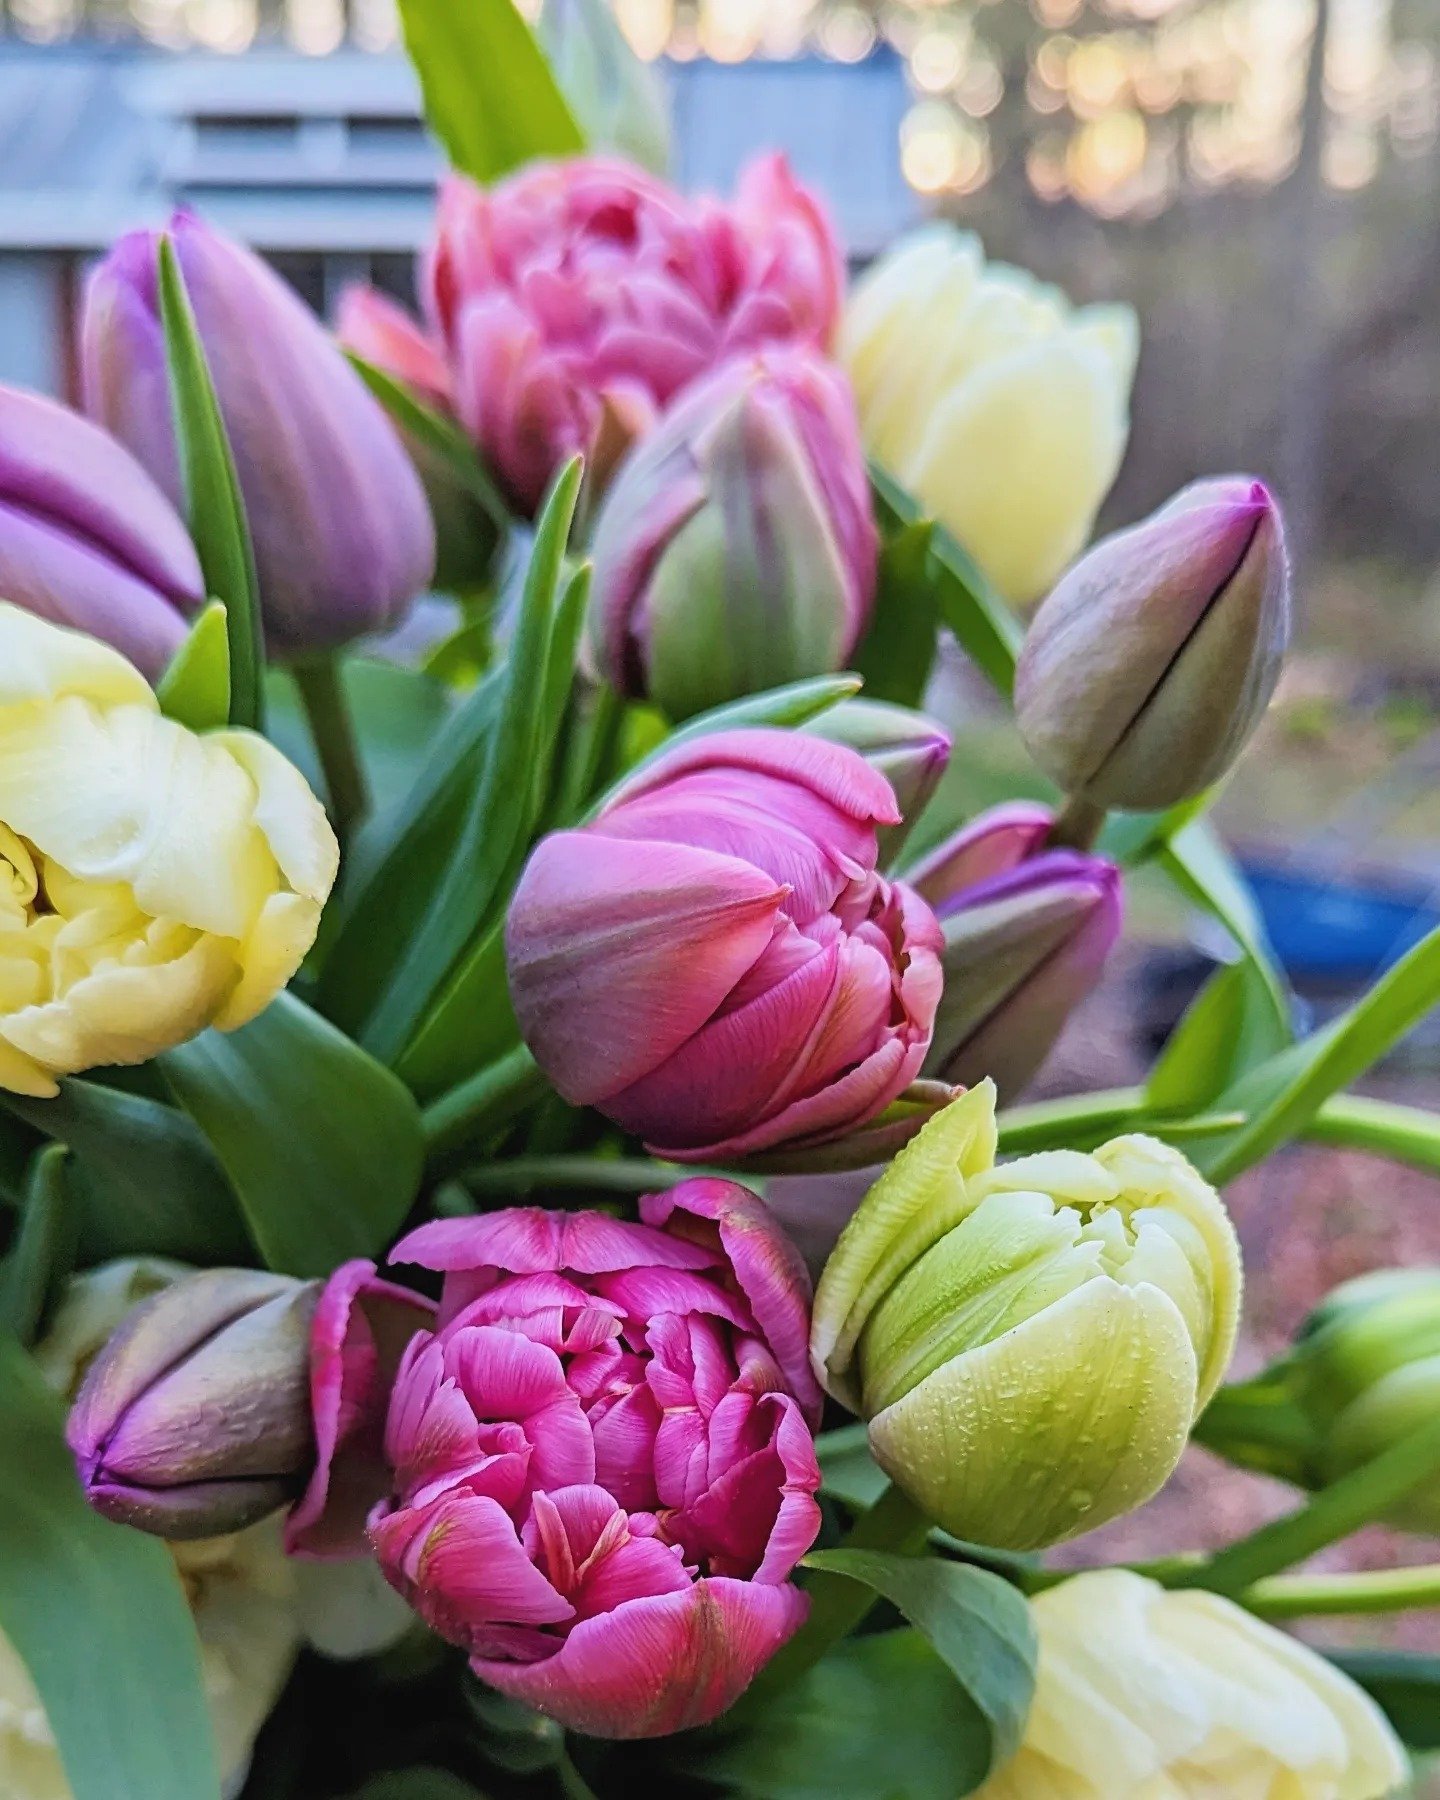 It's Tulip time!! Tulips are my most unexpected favorite flower. I never knew there are such beautiful varieties until I started growing them myself and every year they still amaze me! 

There will be some bunches available this weekend at @soule_far